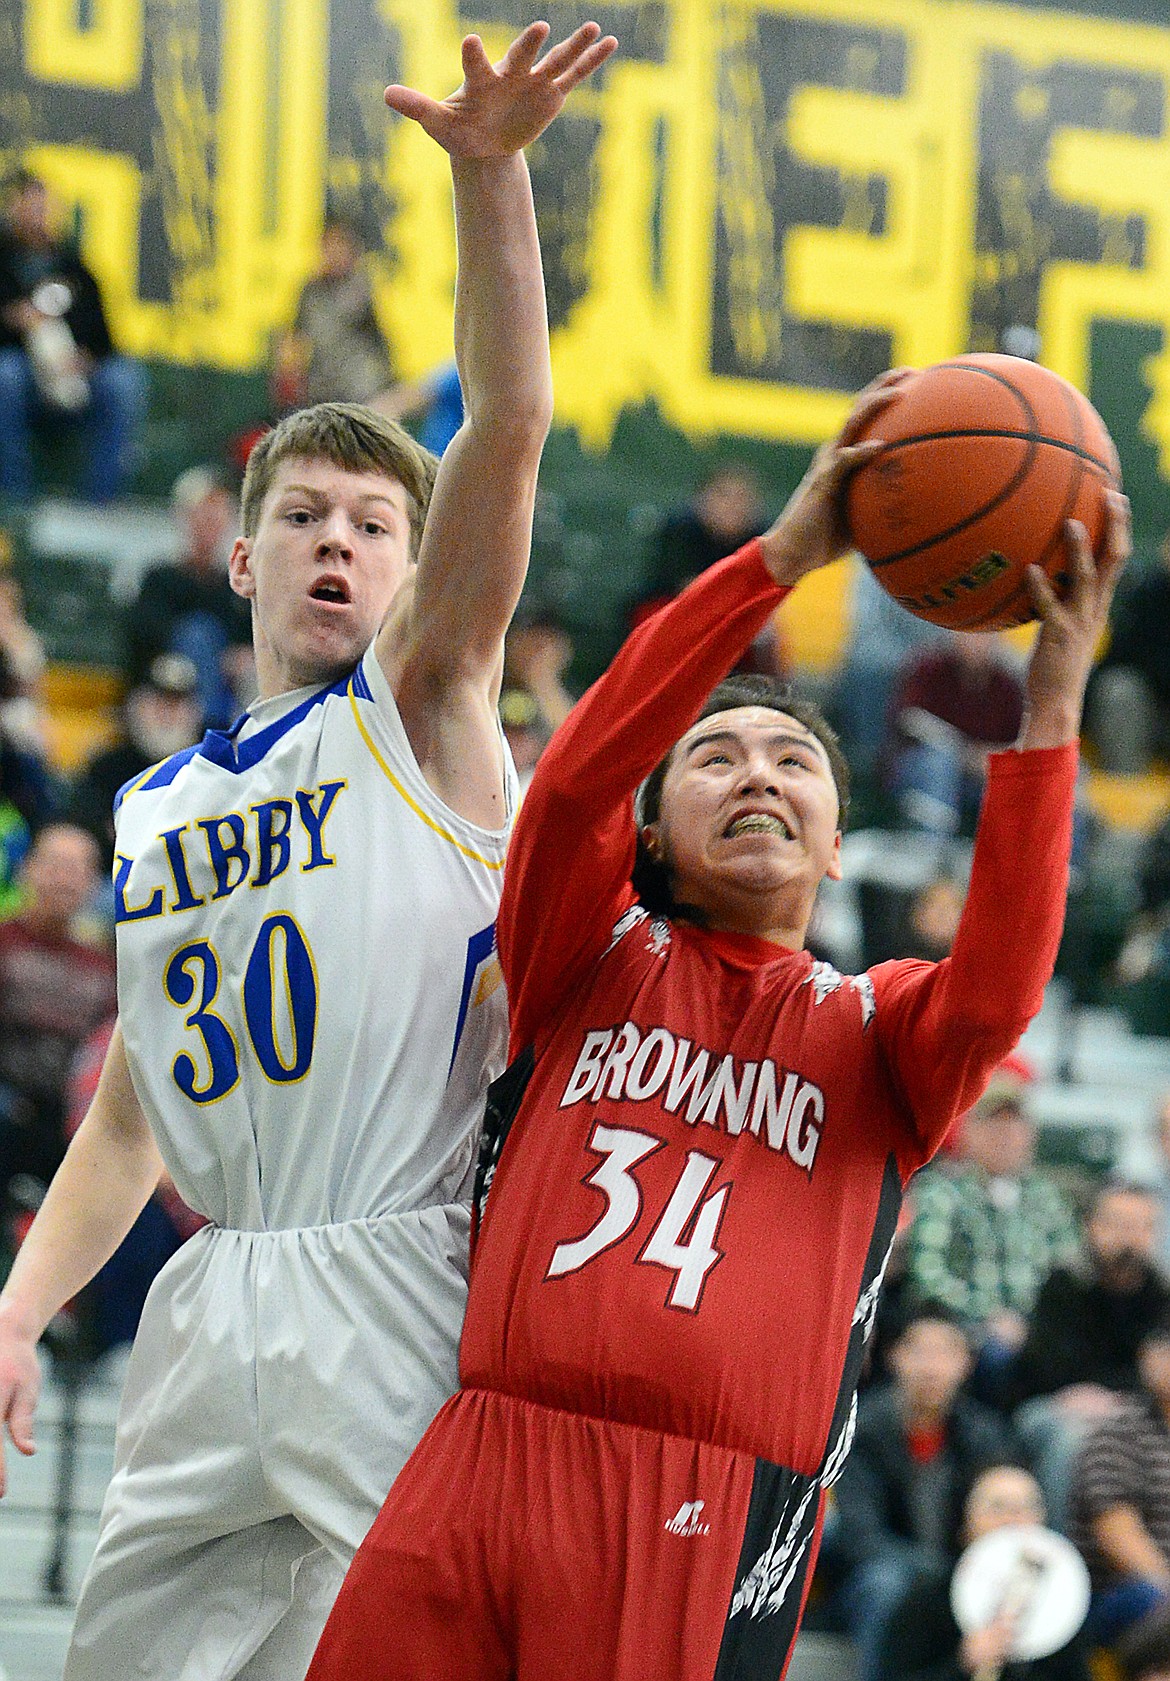 Browning's Deion Mad Plume (34) drives to the hoop in front of Libby's Caden Williams (30) at Whitefish High School on Friday. (Casey Kreider/Daily Inter Lake)